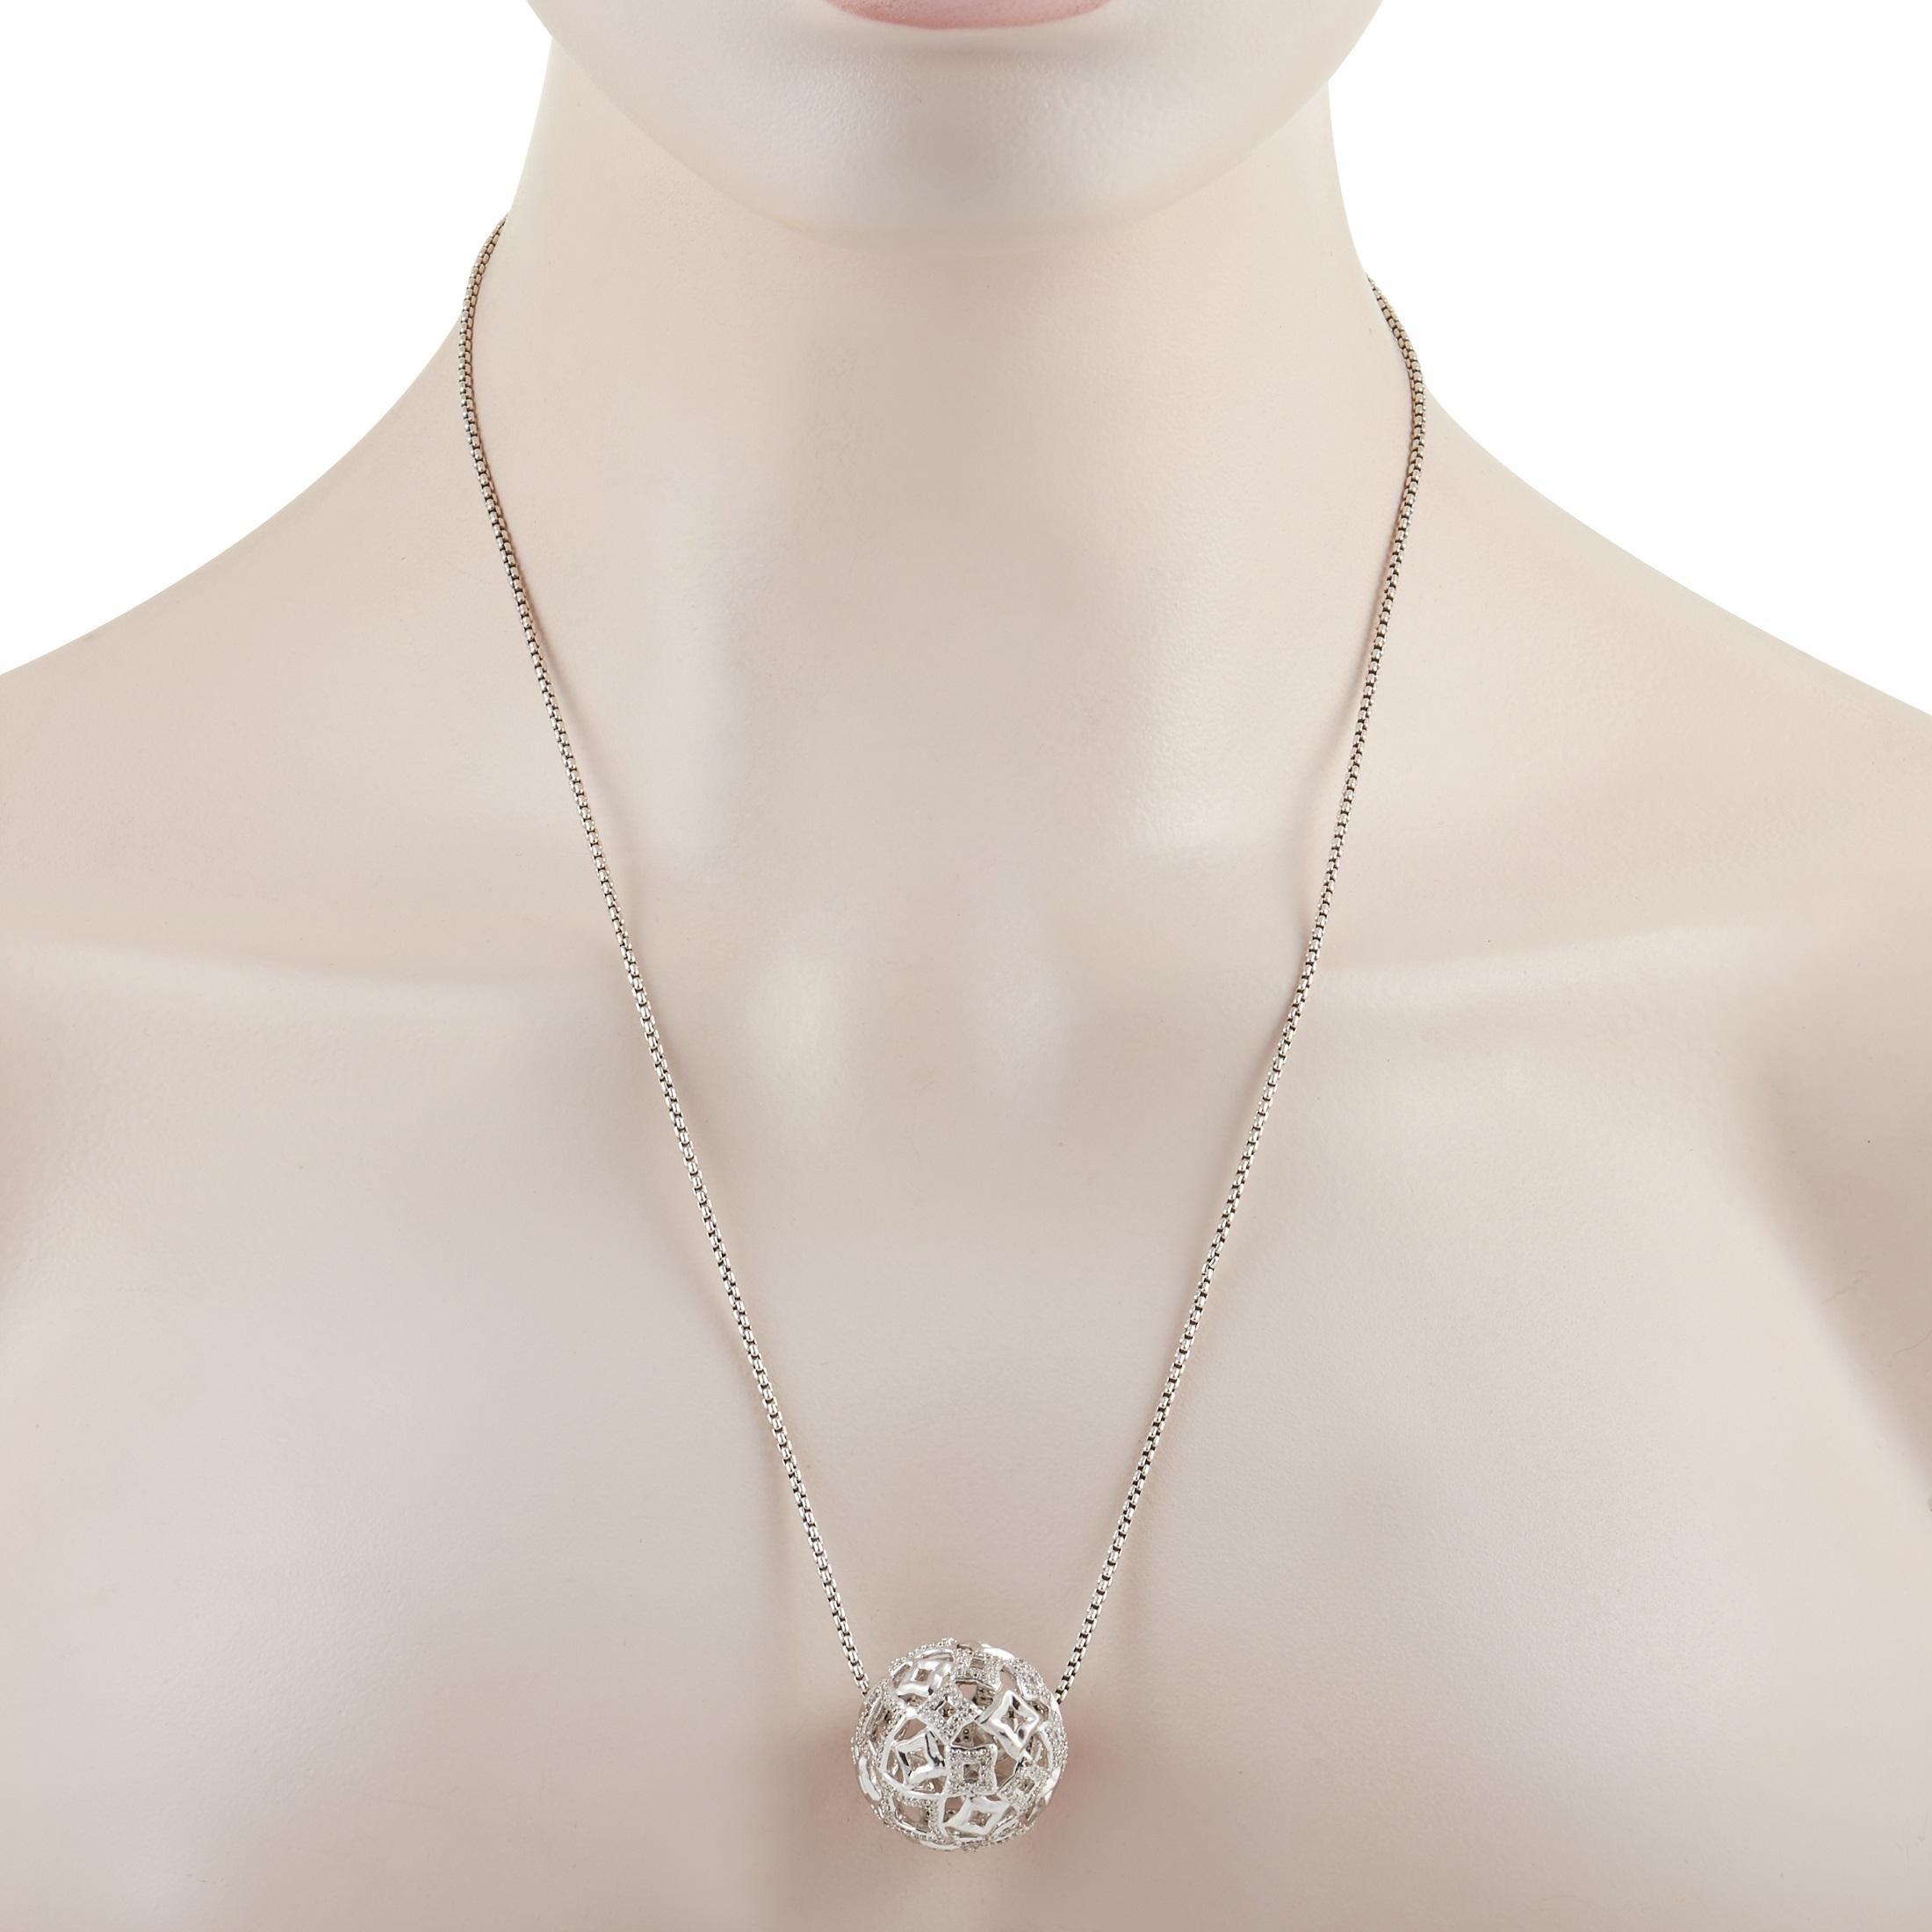 Suspending along a 31-inch chain is a ball of glitter that's sure to give whatever you wear a playful sparkle. This authentic David Yurman Silver 1.00 ct Diamond Ball Pendant Necklace features a 0.88-inch ball-shaped pendant with a sculpted